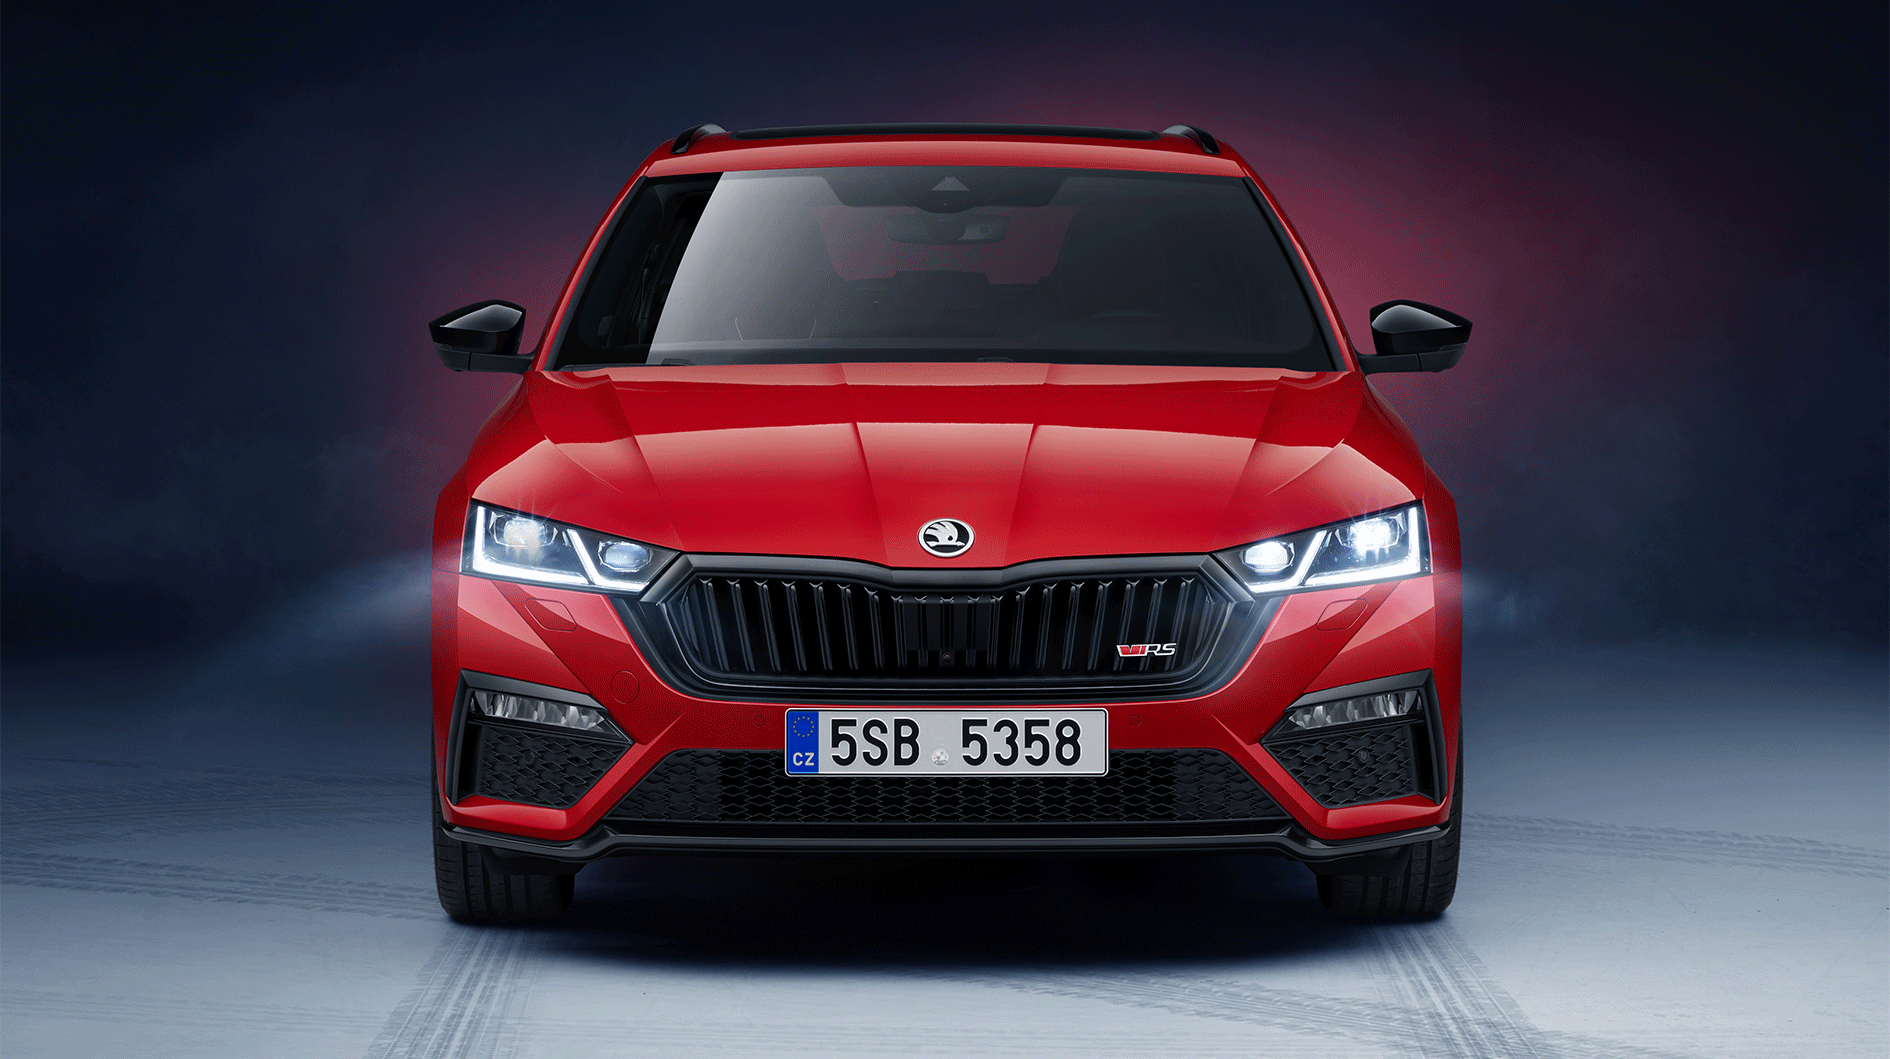 Red Octavia RS iV front